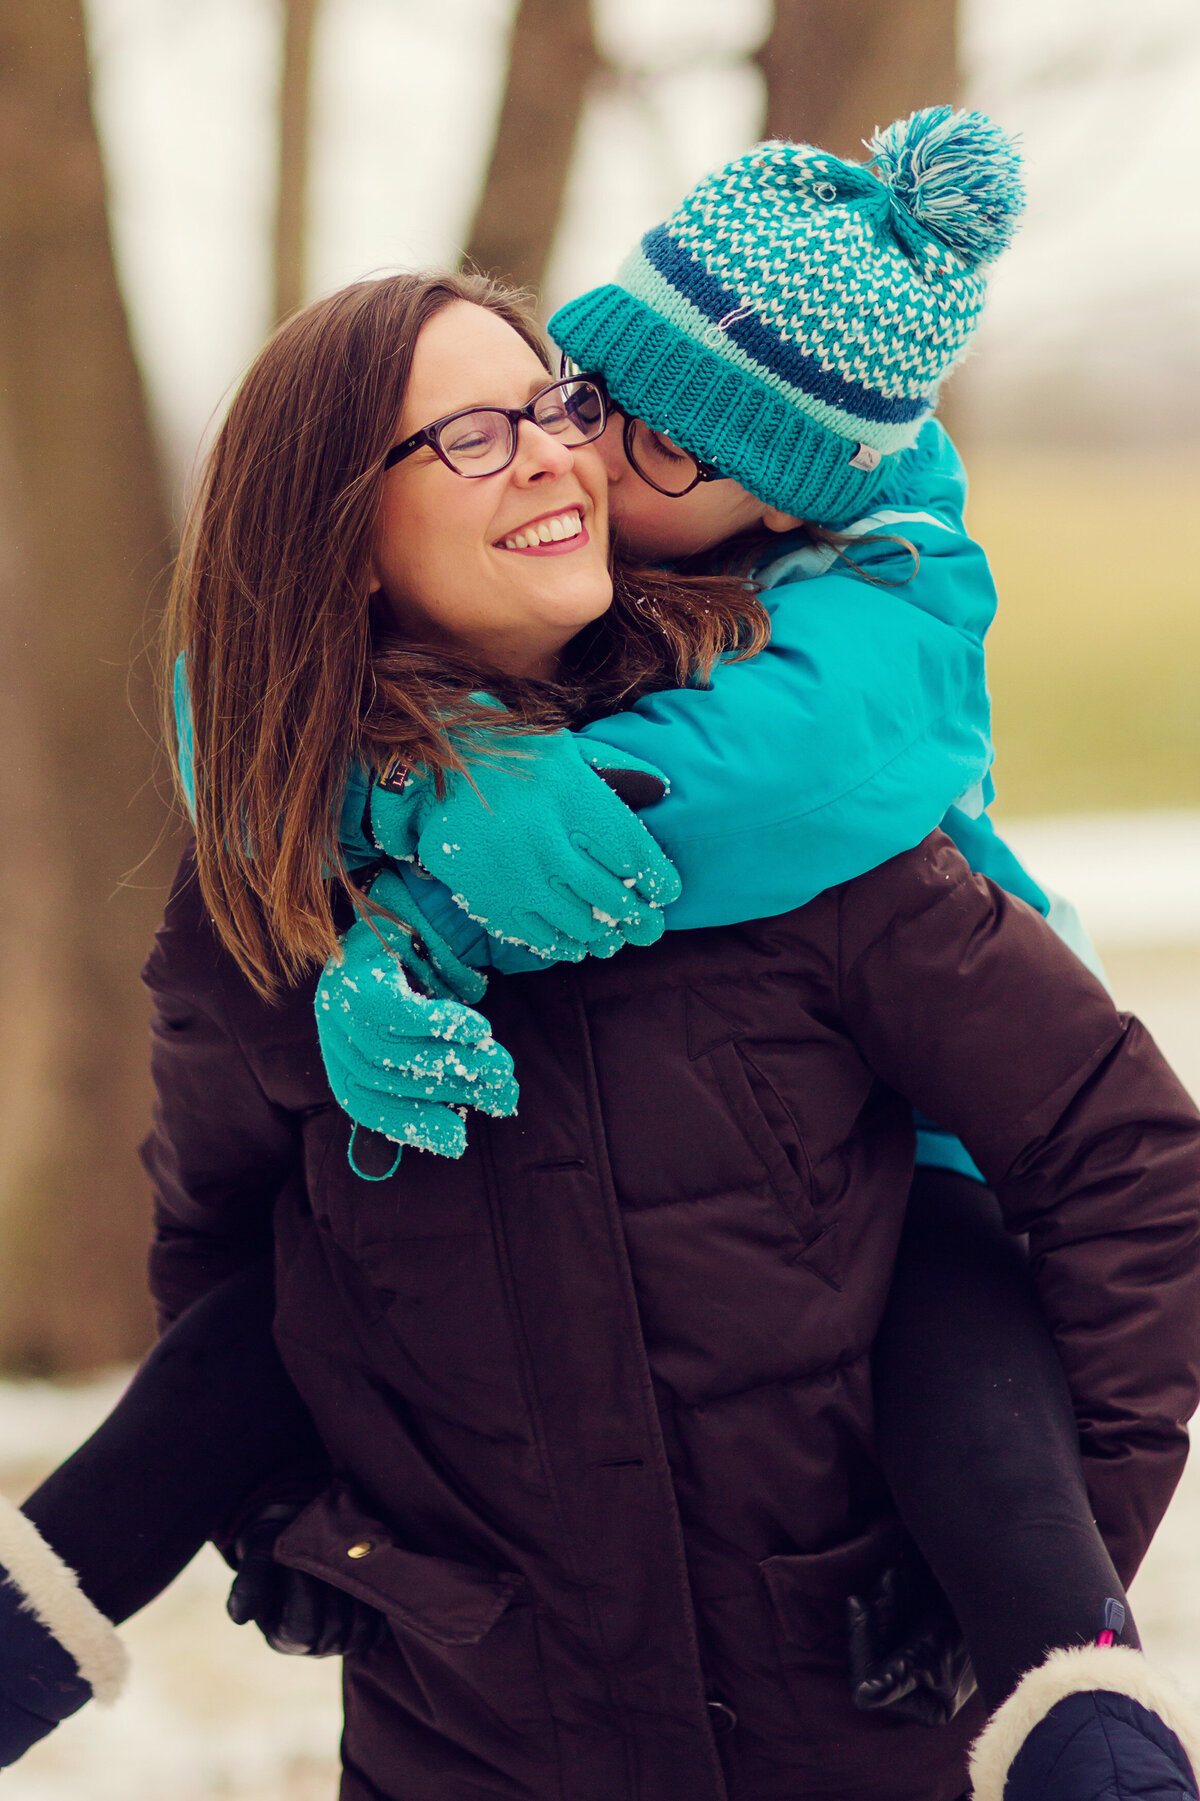 Mom in a black coat and glasses has her daughter on her back. Her daughter is wearing a blue coat and blue hat.